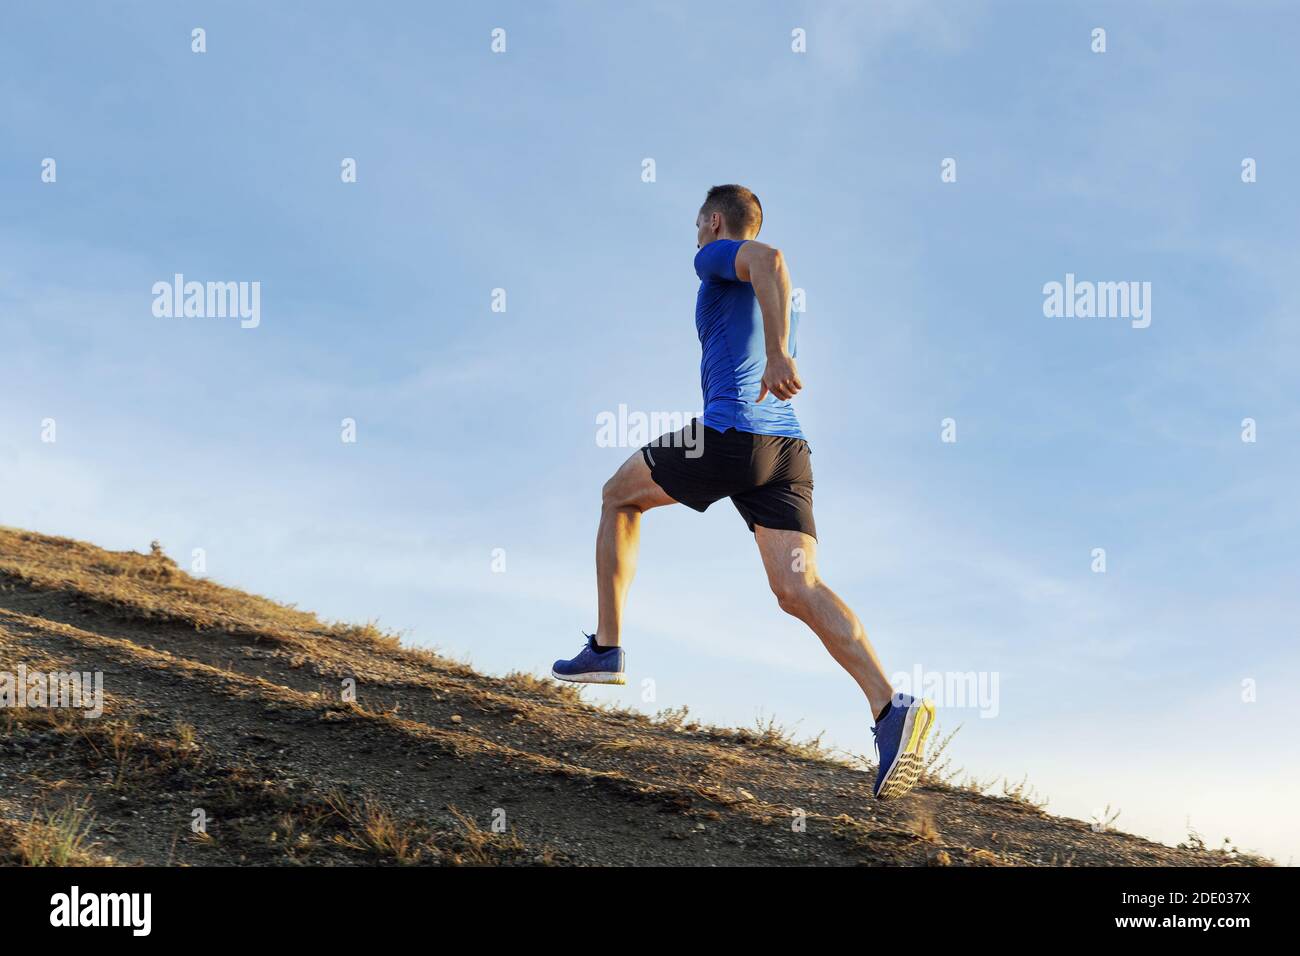 male athlete runner run mountain trail in background sky Stock Photo